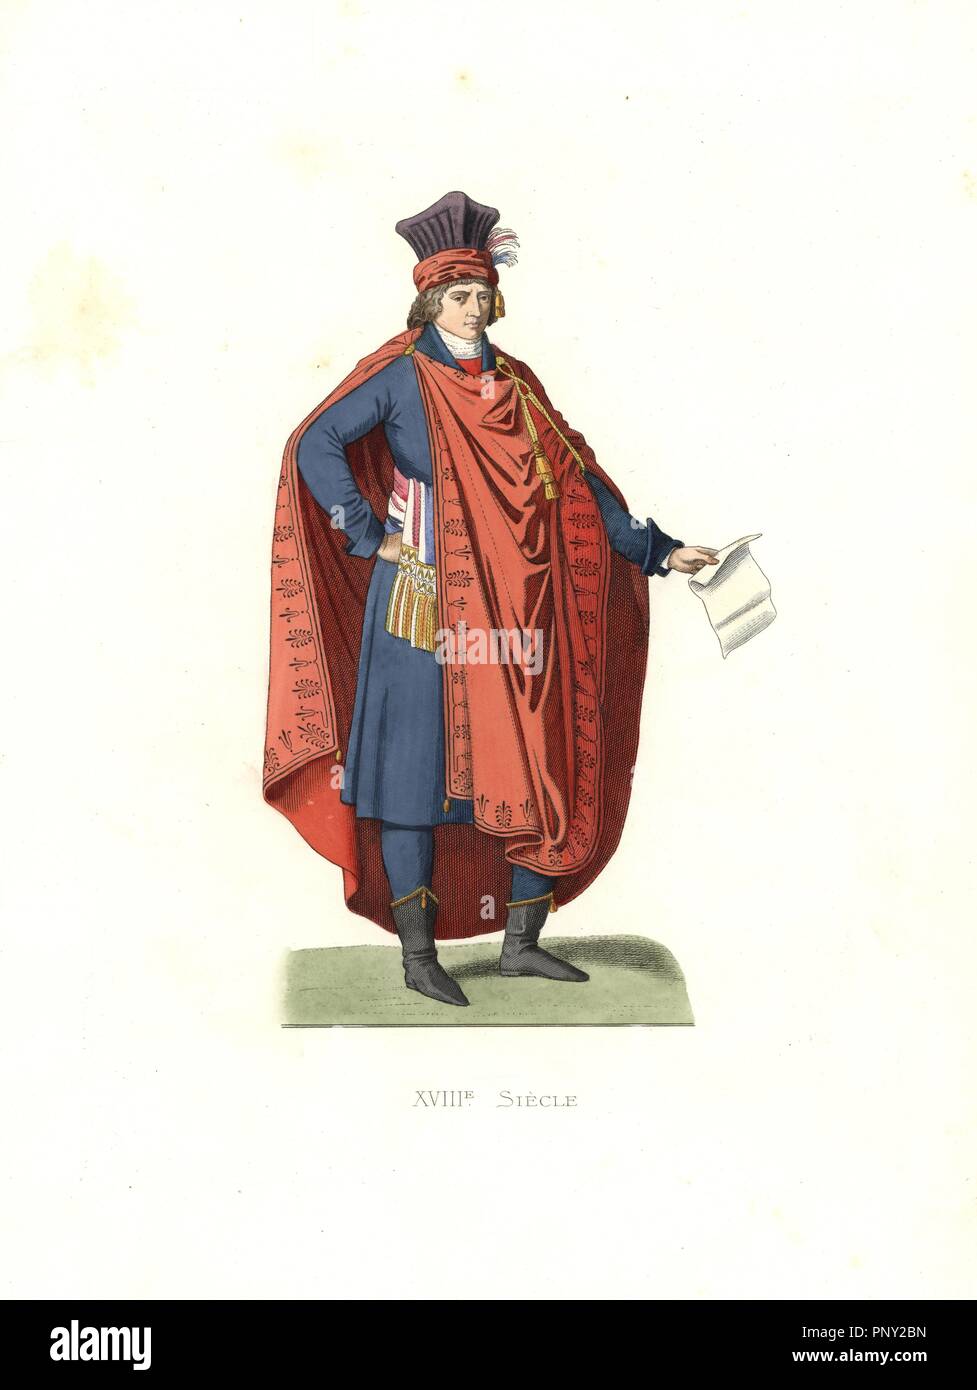 Representant du peuple, France, 18th century, from a contemporary print. Handcolored illustration by E. Lechevallier-Chevignard, lithographed by A. Didier, L. Flameng, F. Laguillermie, from Georges Duplessis's 'Costumes historiques des XVIe, XVIIe et XVIIIe siecles' (Historical costumes of the 16th, 17th and 18th centuries), Paris 1867. The book was a continuation of the series on the costumes of the 12th to 15th centuries published by Camille Bonnard and Paul Mercuri from 1830. Georges Duplessis (1834-1899) was curator of the Prints department at the Bibliotheque nationale. Edmond Lechevallie Stock Photo